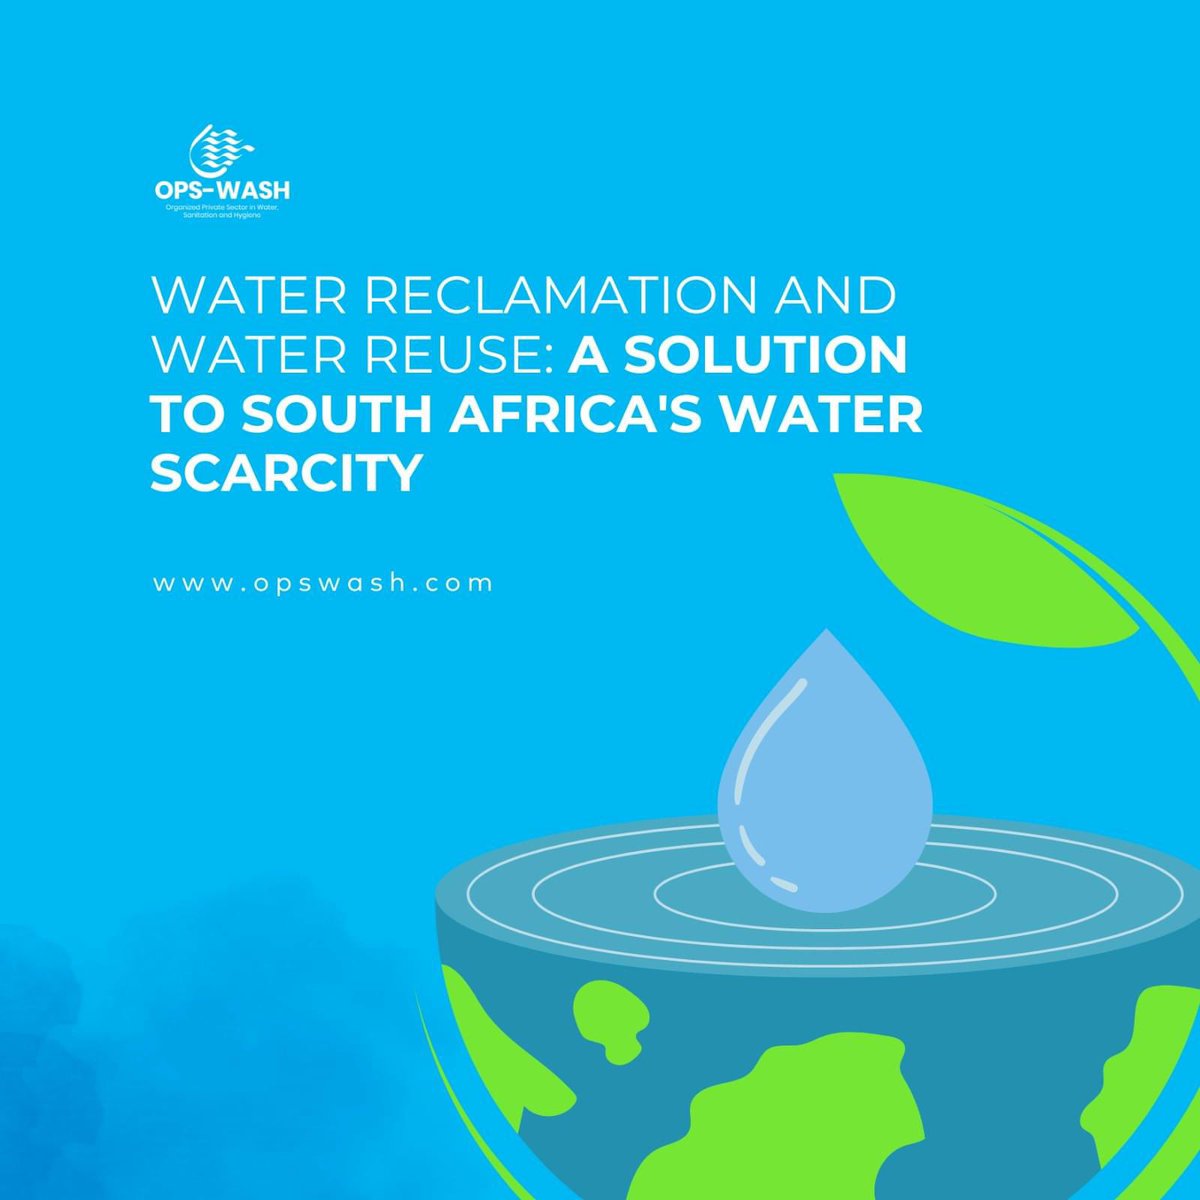 💧 Water reuse (also known as water recycling / reclamation) reclaims water from a variety of sources then treats and reuses it for beneficial purposes such as agriculture potable water supplies, groundwater replenishment, industrial processes, and environmental restoration.